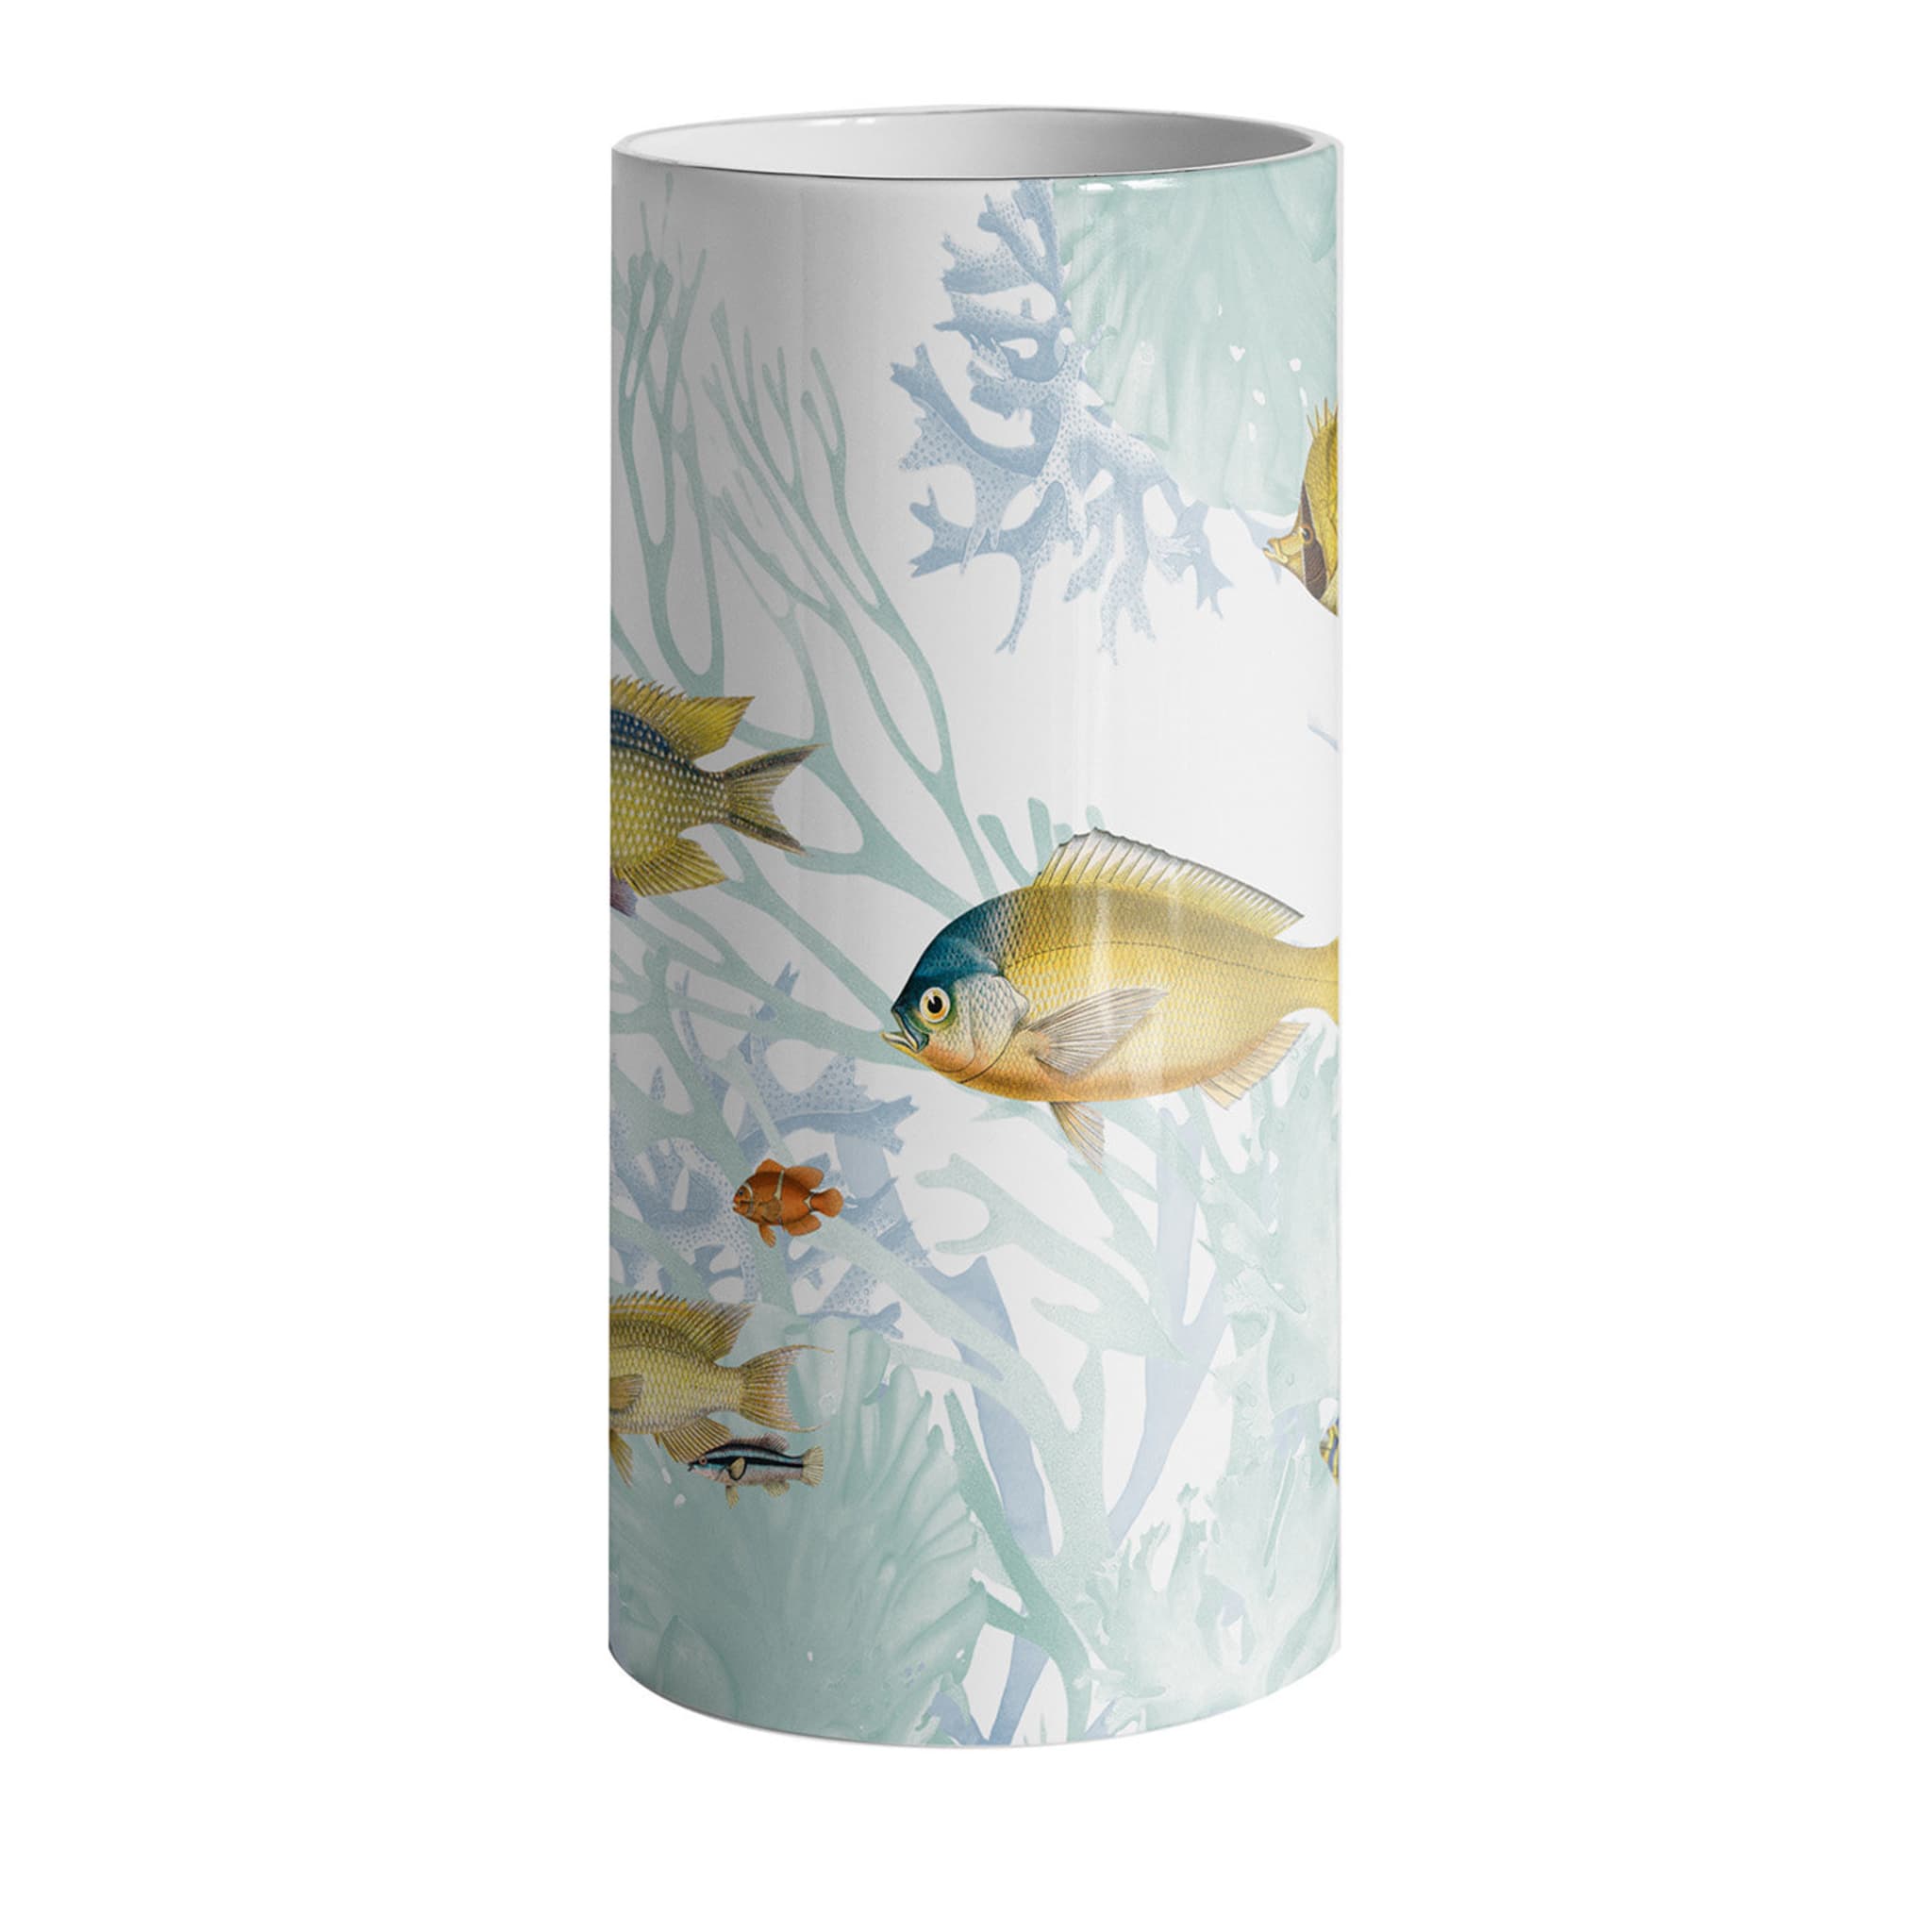 Amami Porcelain Cylindrical Vase With Tropical Fishes #1 - Main view